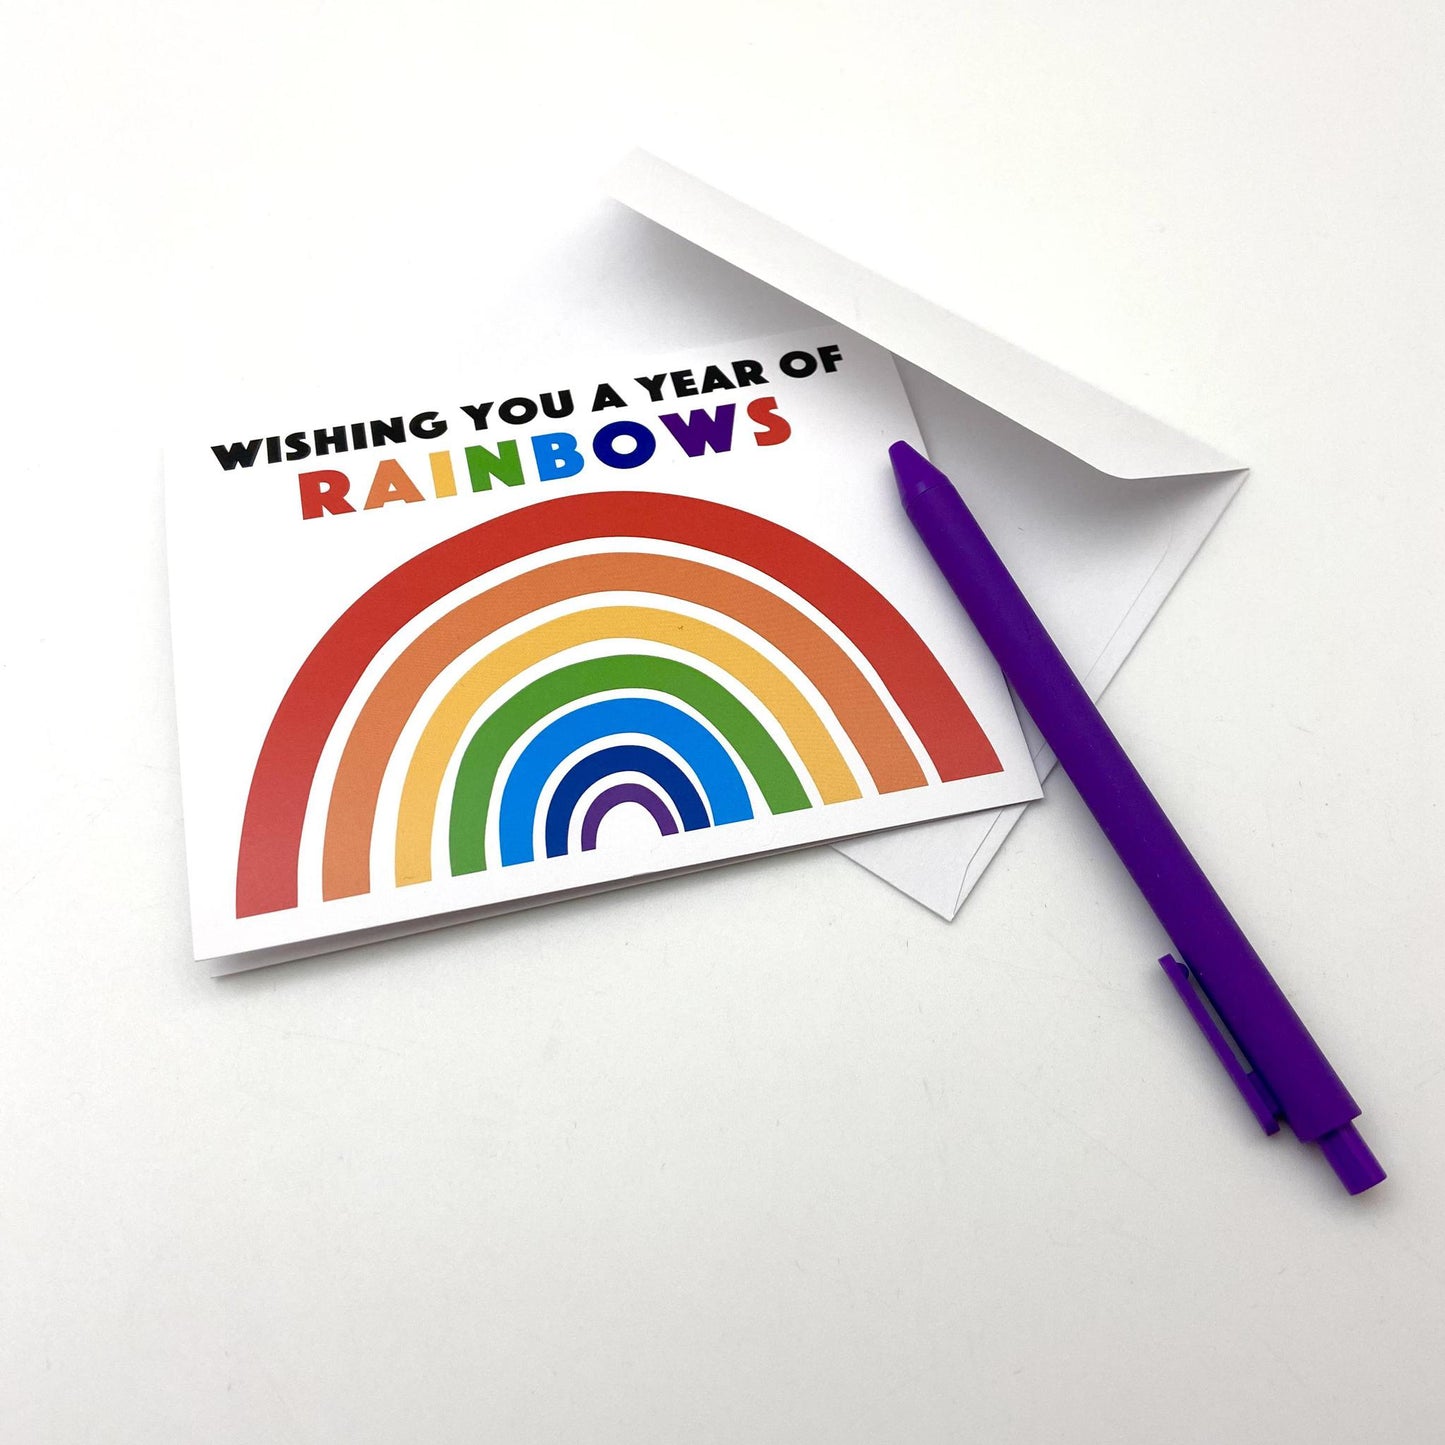 Greeting Card - "Wishing You A Year Of Rainbows"